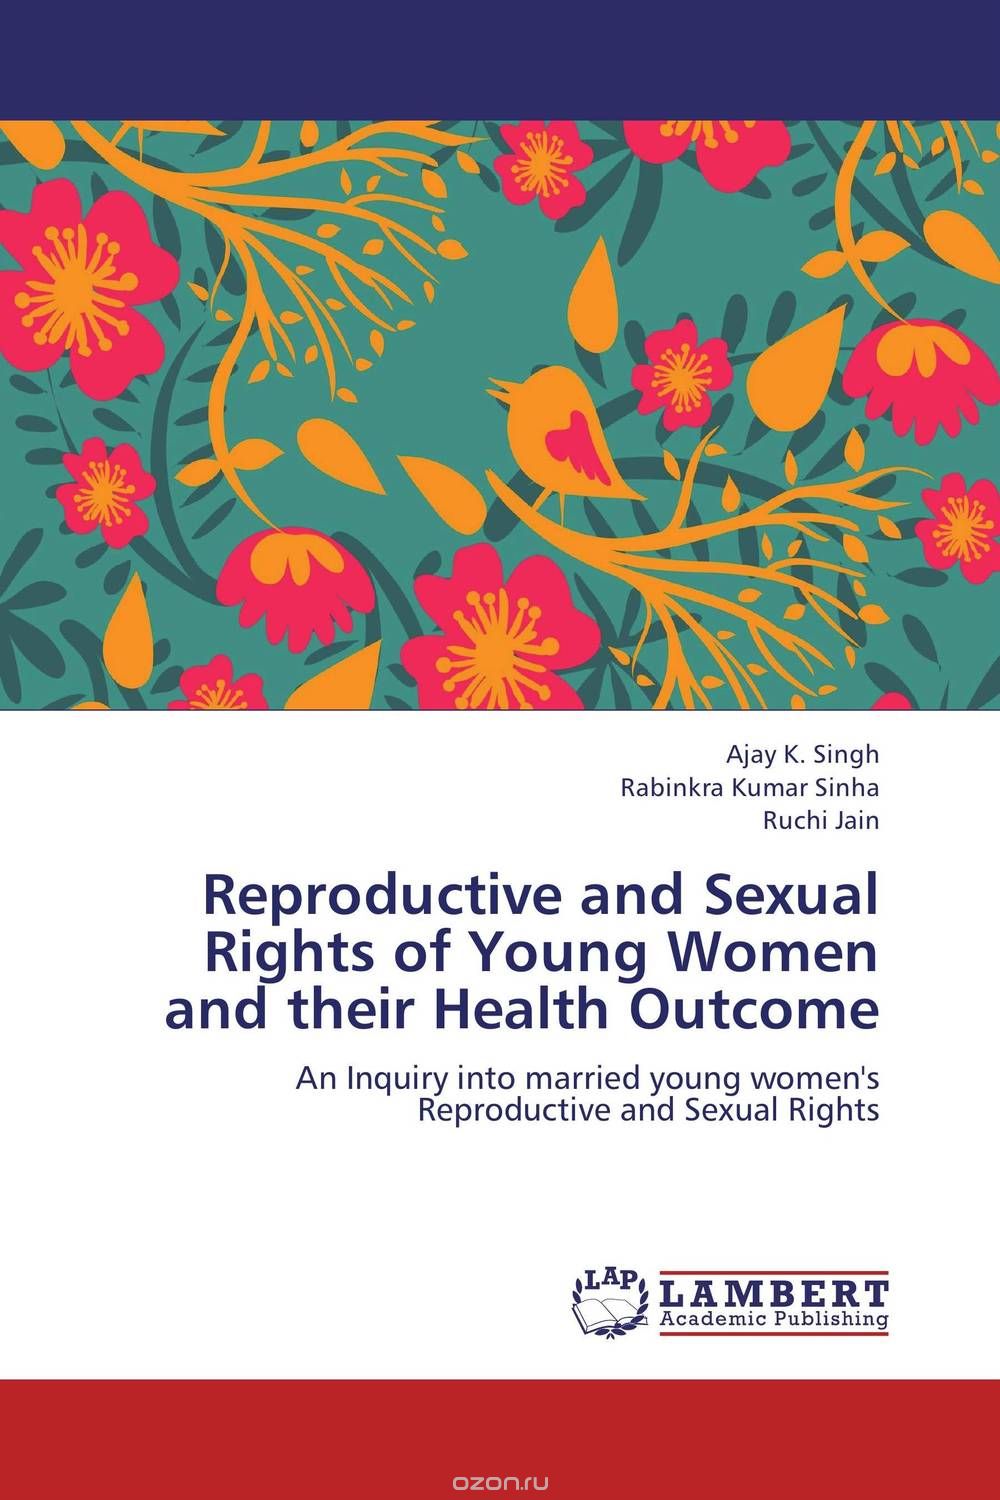 Reproductive and Sexual Rights of Young Women and their Health Outcome